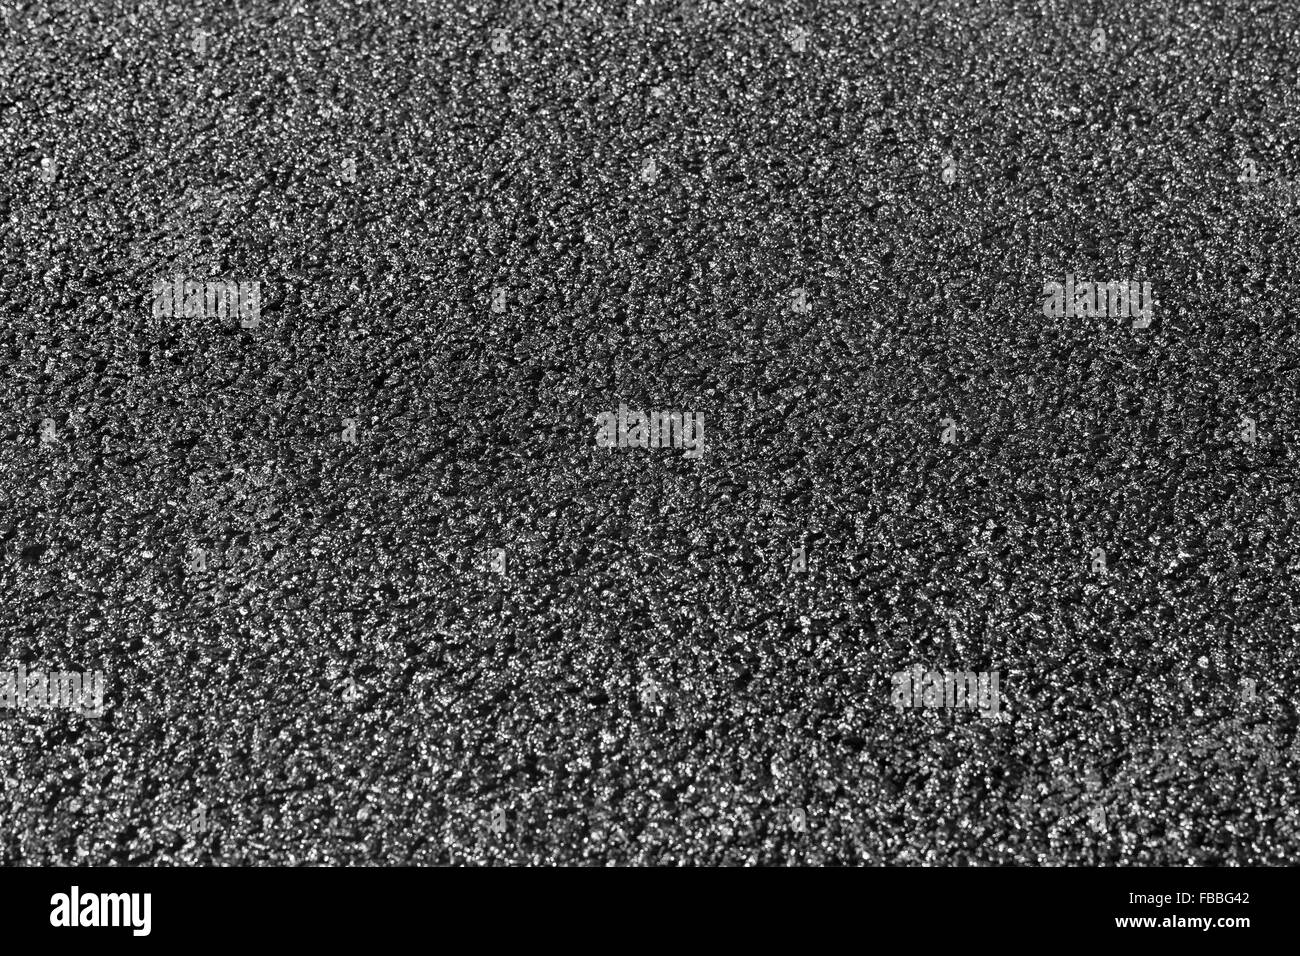 New black asphalt pavement immediately after asphalting, background with selective focus on the middle of the road Stock Photo